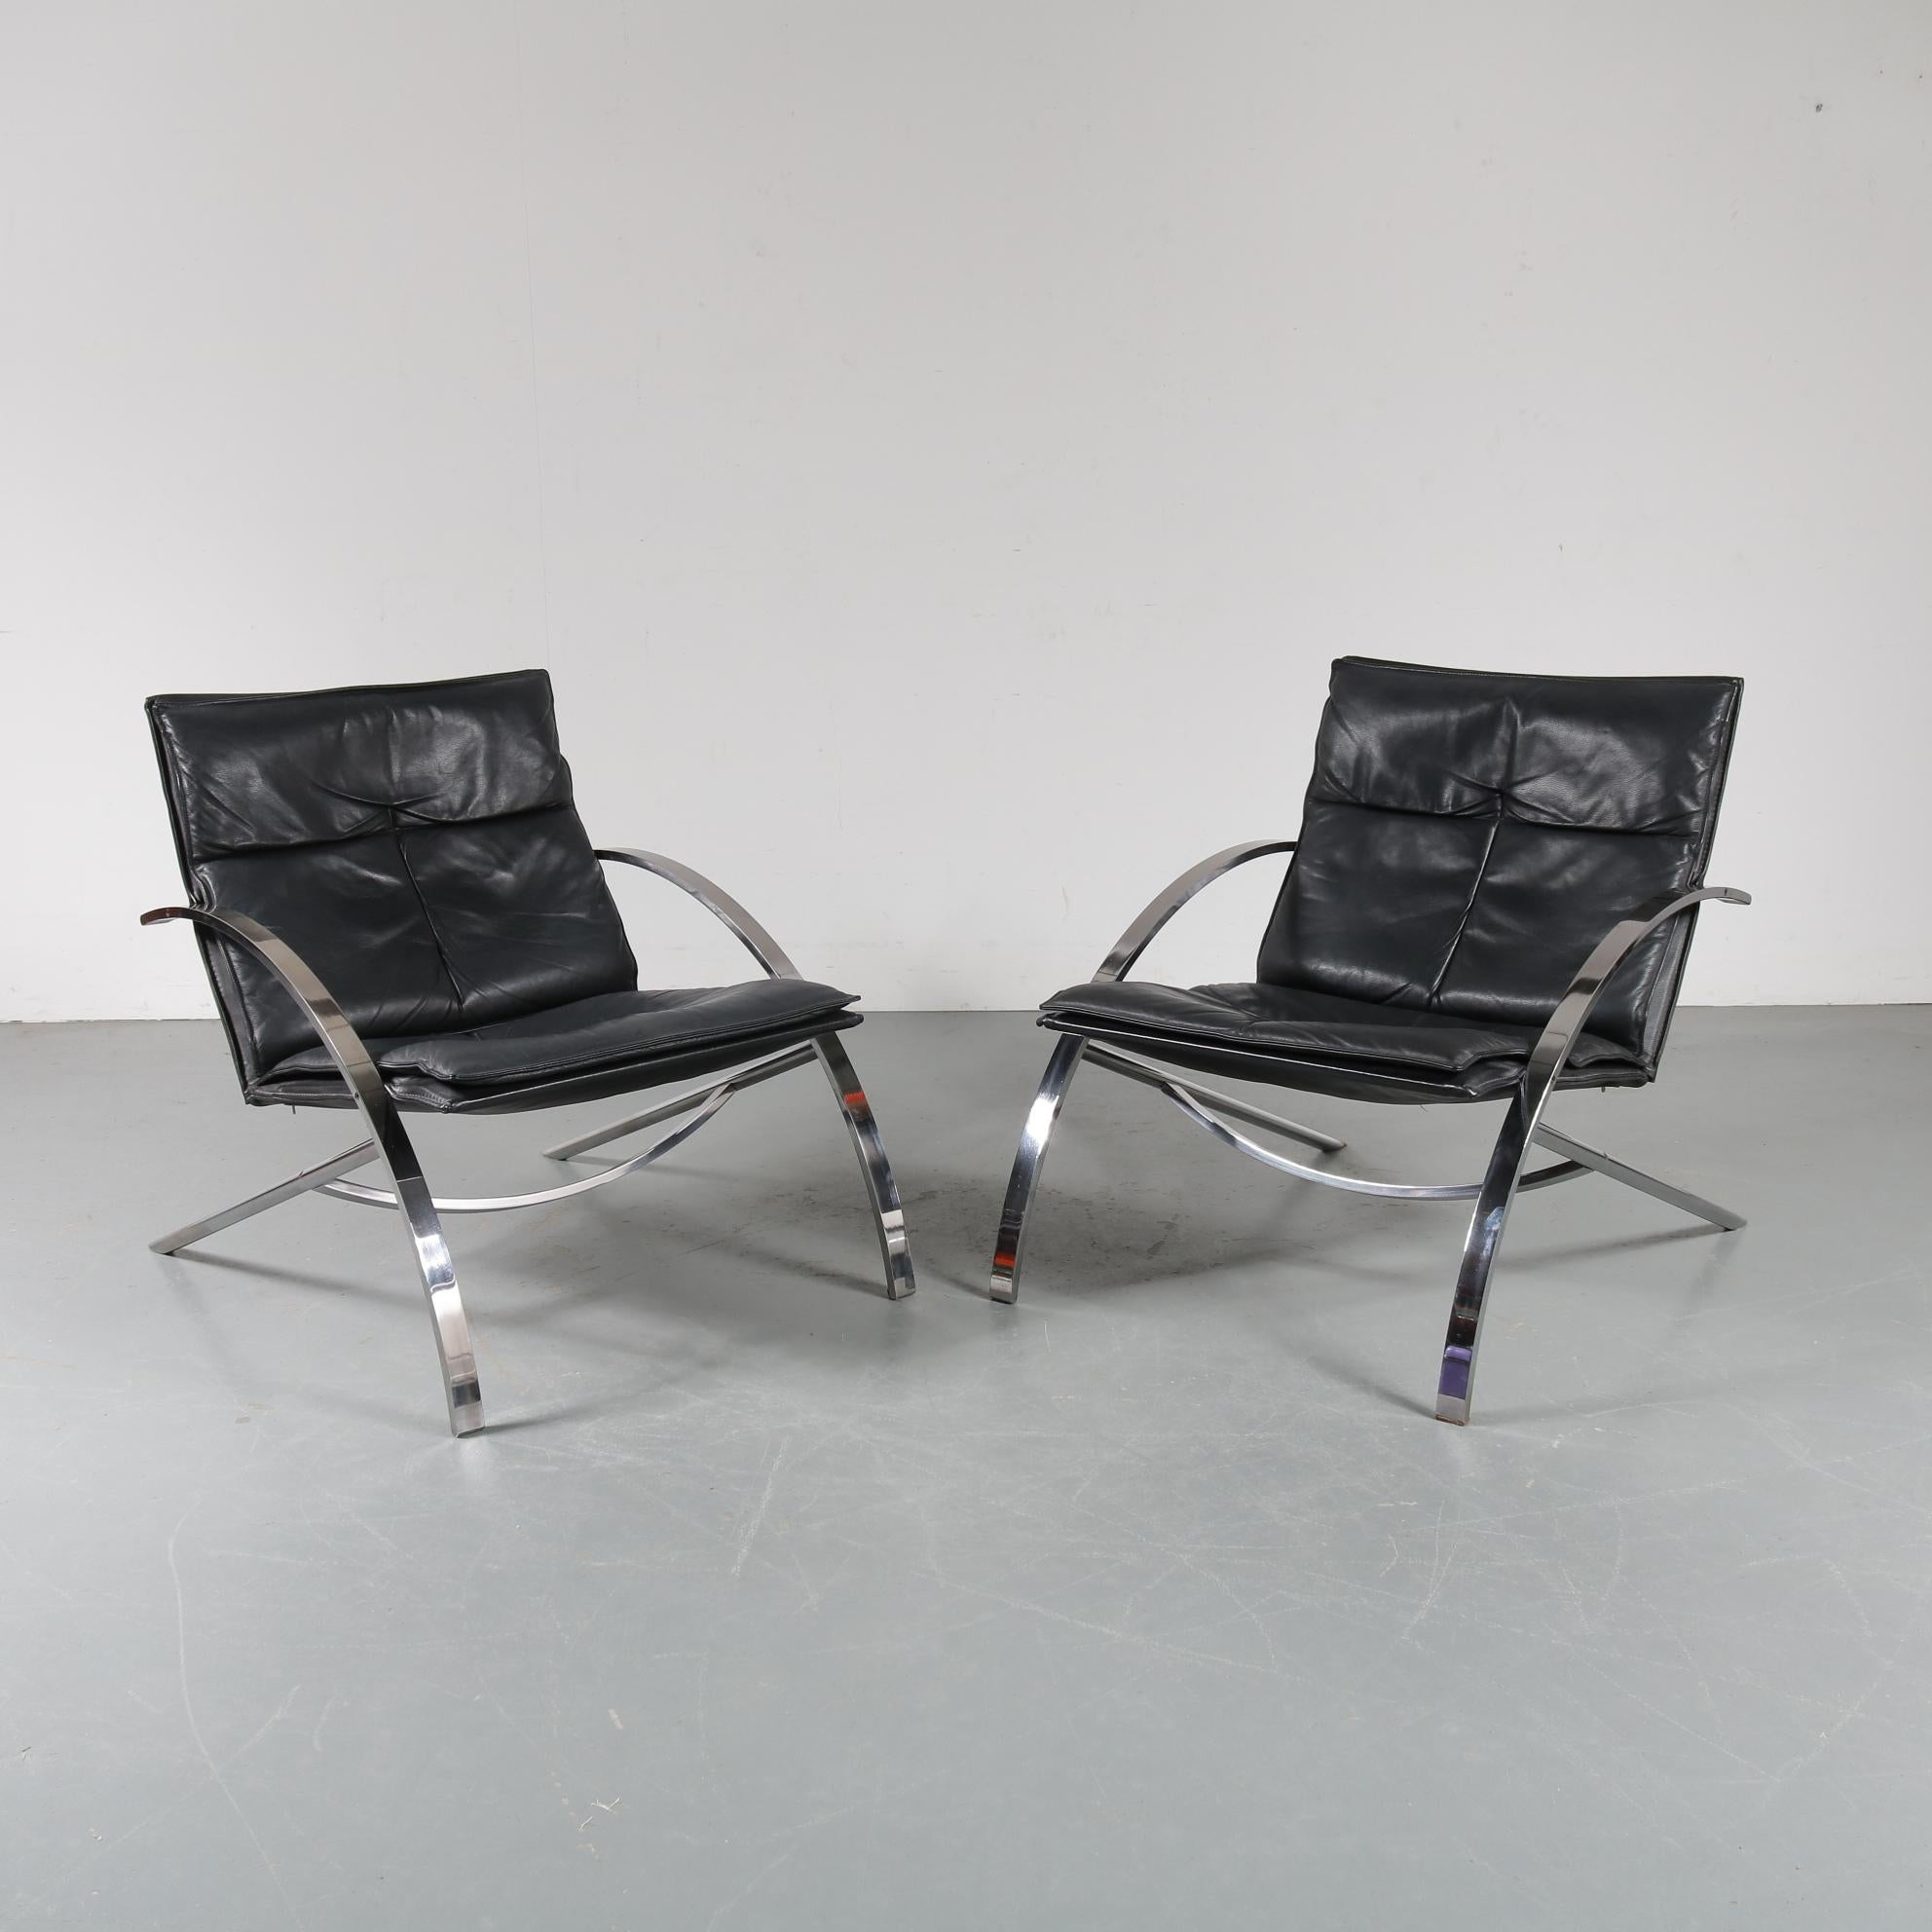 A unique pair of “Arco” lounge chairs designed by Paul Tuttle, manufactured by Strässle in Switzerland in 1976.

Made of beautiful chrome-plated metal in bent shapes, with a smooth leg to armrest transition. The seats and backs are upholstered in